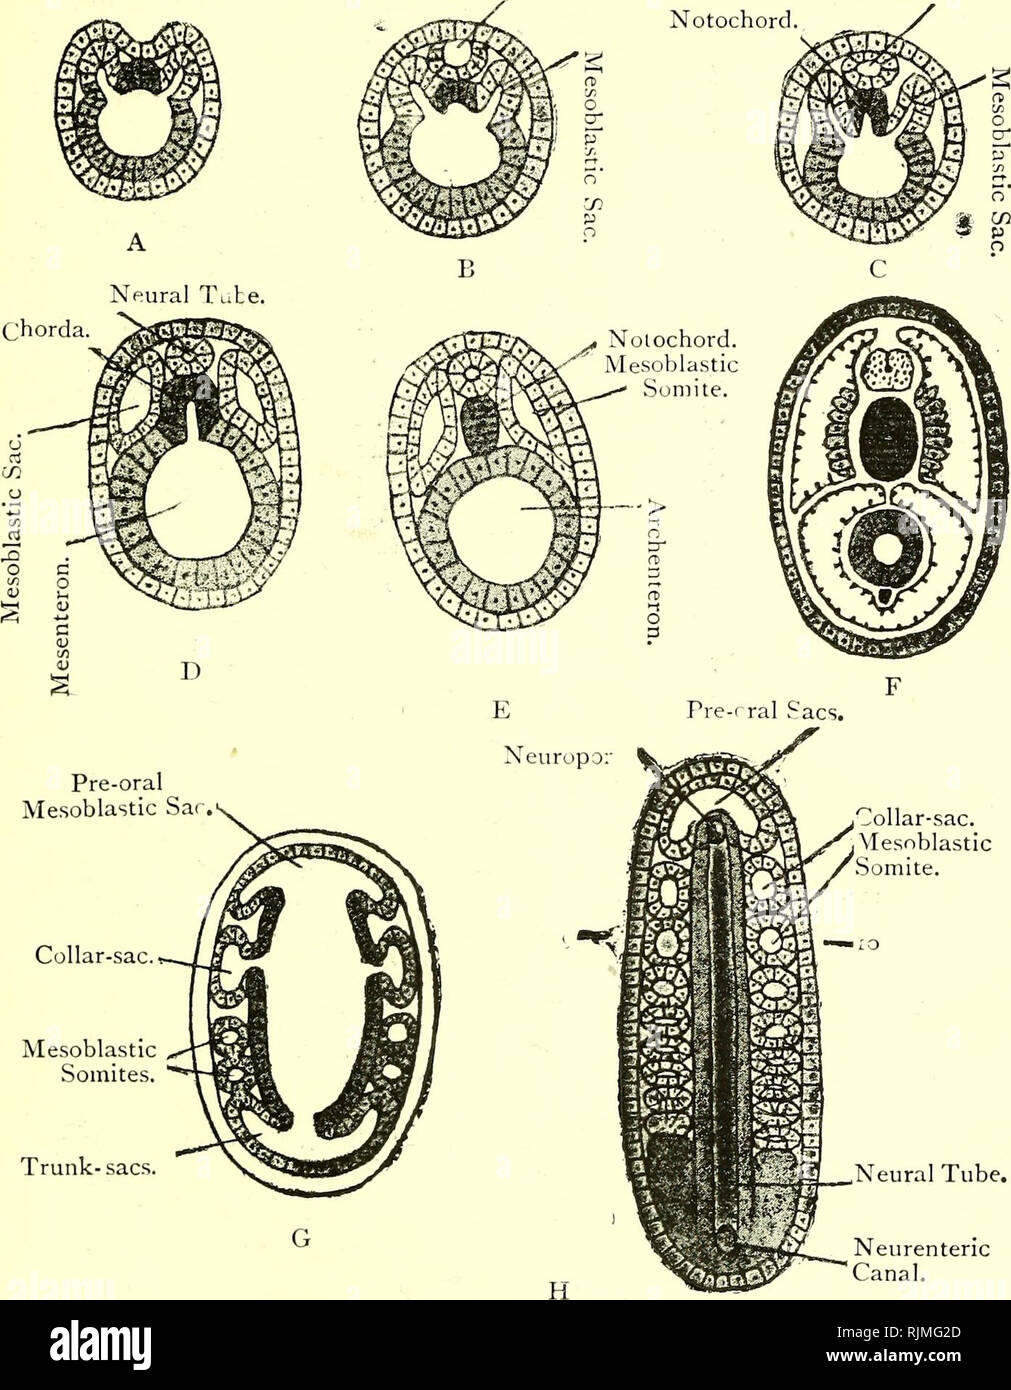 . Elementary text-book of zoology [electronic resource]. Zoology. AMPHIOXUS. 305 Fig. 217.—The Development of Amphioxus as seen in Transverse Sections. Neural Groove. Neural Tube. Neural Tube.. (A Through D 1-2 In Fig. 216; B through E 3-.^, and C through E 5-6 in Fig. 216 ; D through F 7-8 in Fig. 216; E through 9-10 in Fig. 217 ; and F through posterior part of 1' ig. 219.) »#&gt; A, shows the neural groove and developing mesoblastic sacs ; B and C, shows the neural tube ; D, shows the completed mesoblastic sacs ; E, shows the notochord completely formed ; and F, shows the formation of myoto Stock Photo